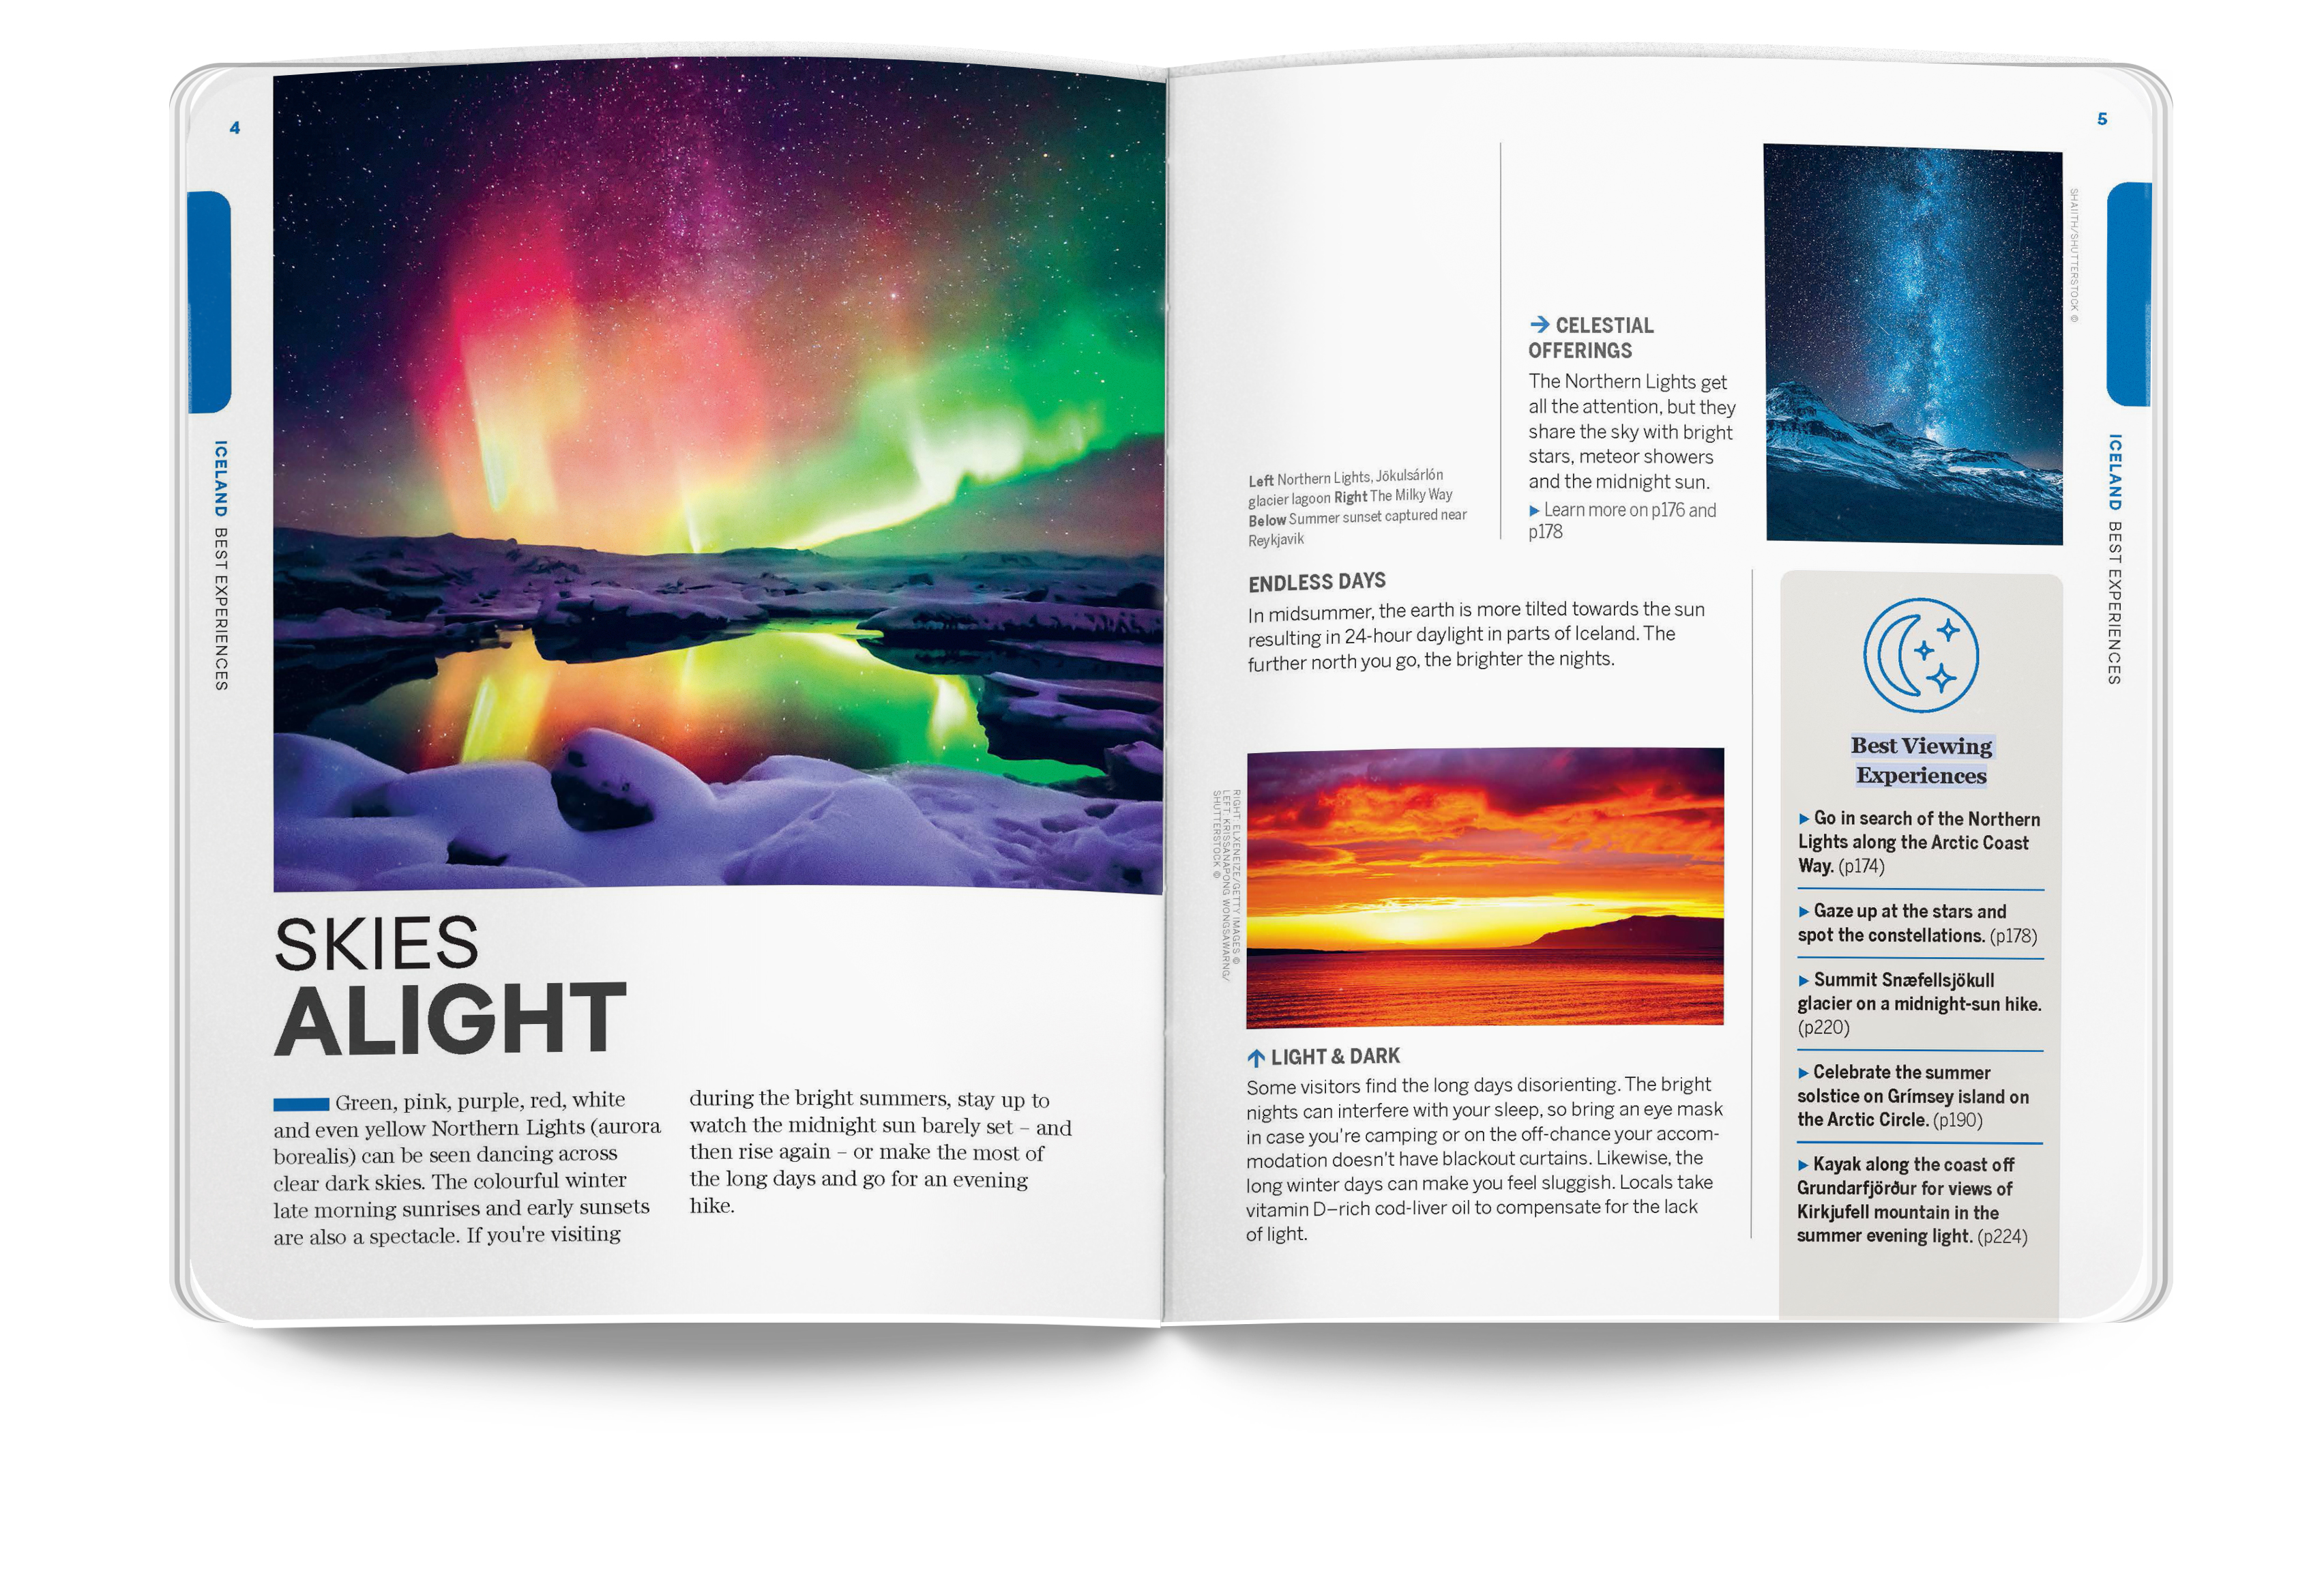 Iceland 8 (Lonely Planet Travel Guides)